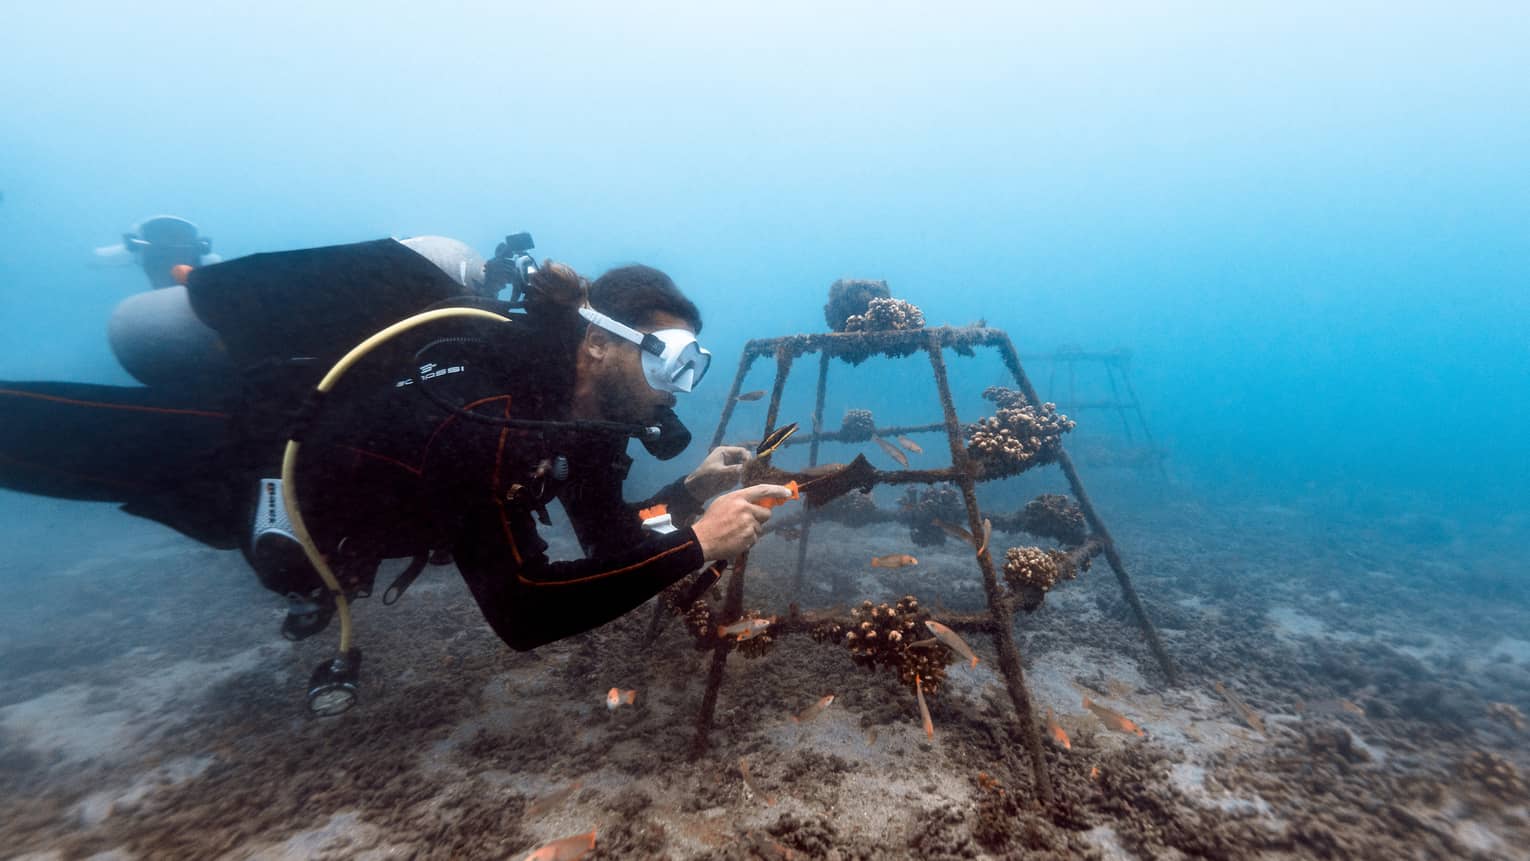 A scuba-diver inspects coral fragments planted underwater in a metal pyramid frame surrounded by pristine aqua water.